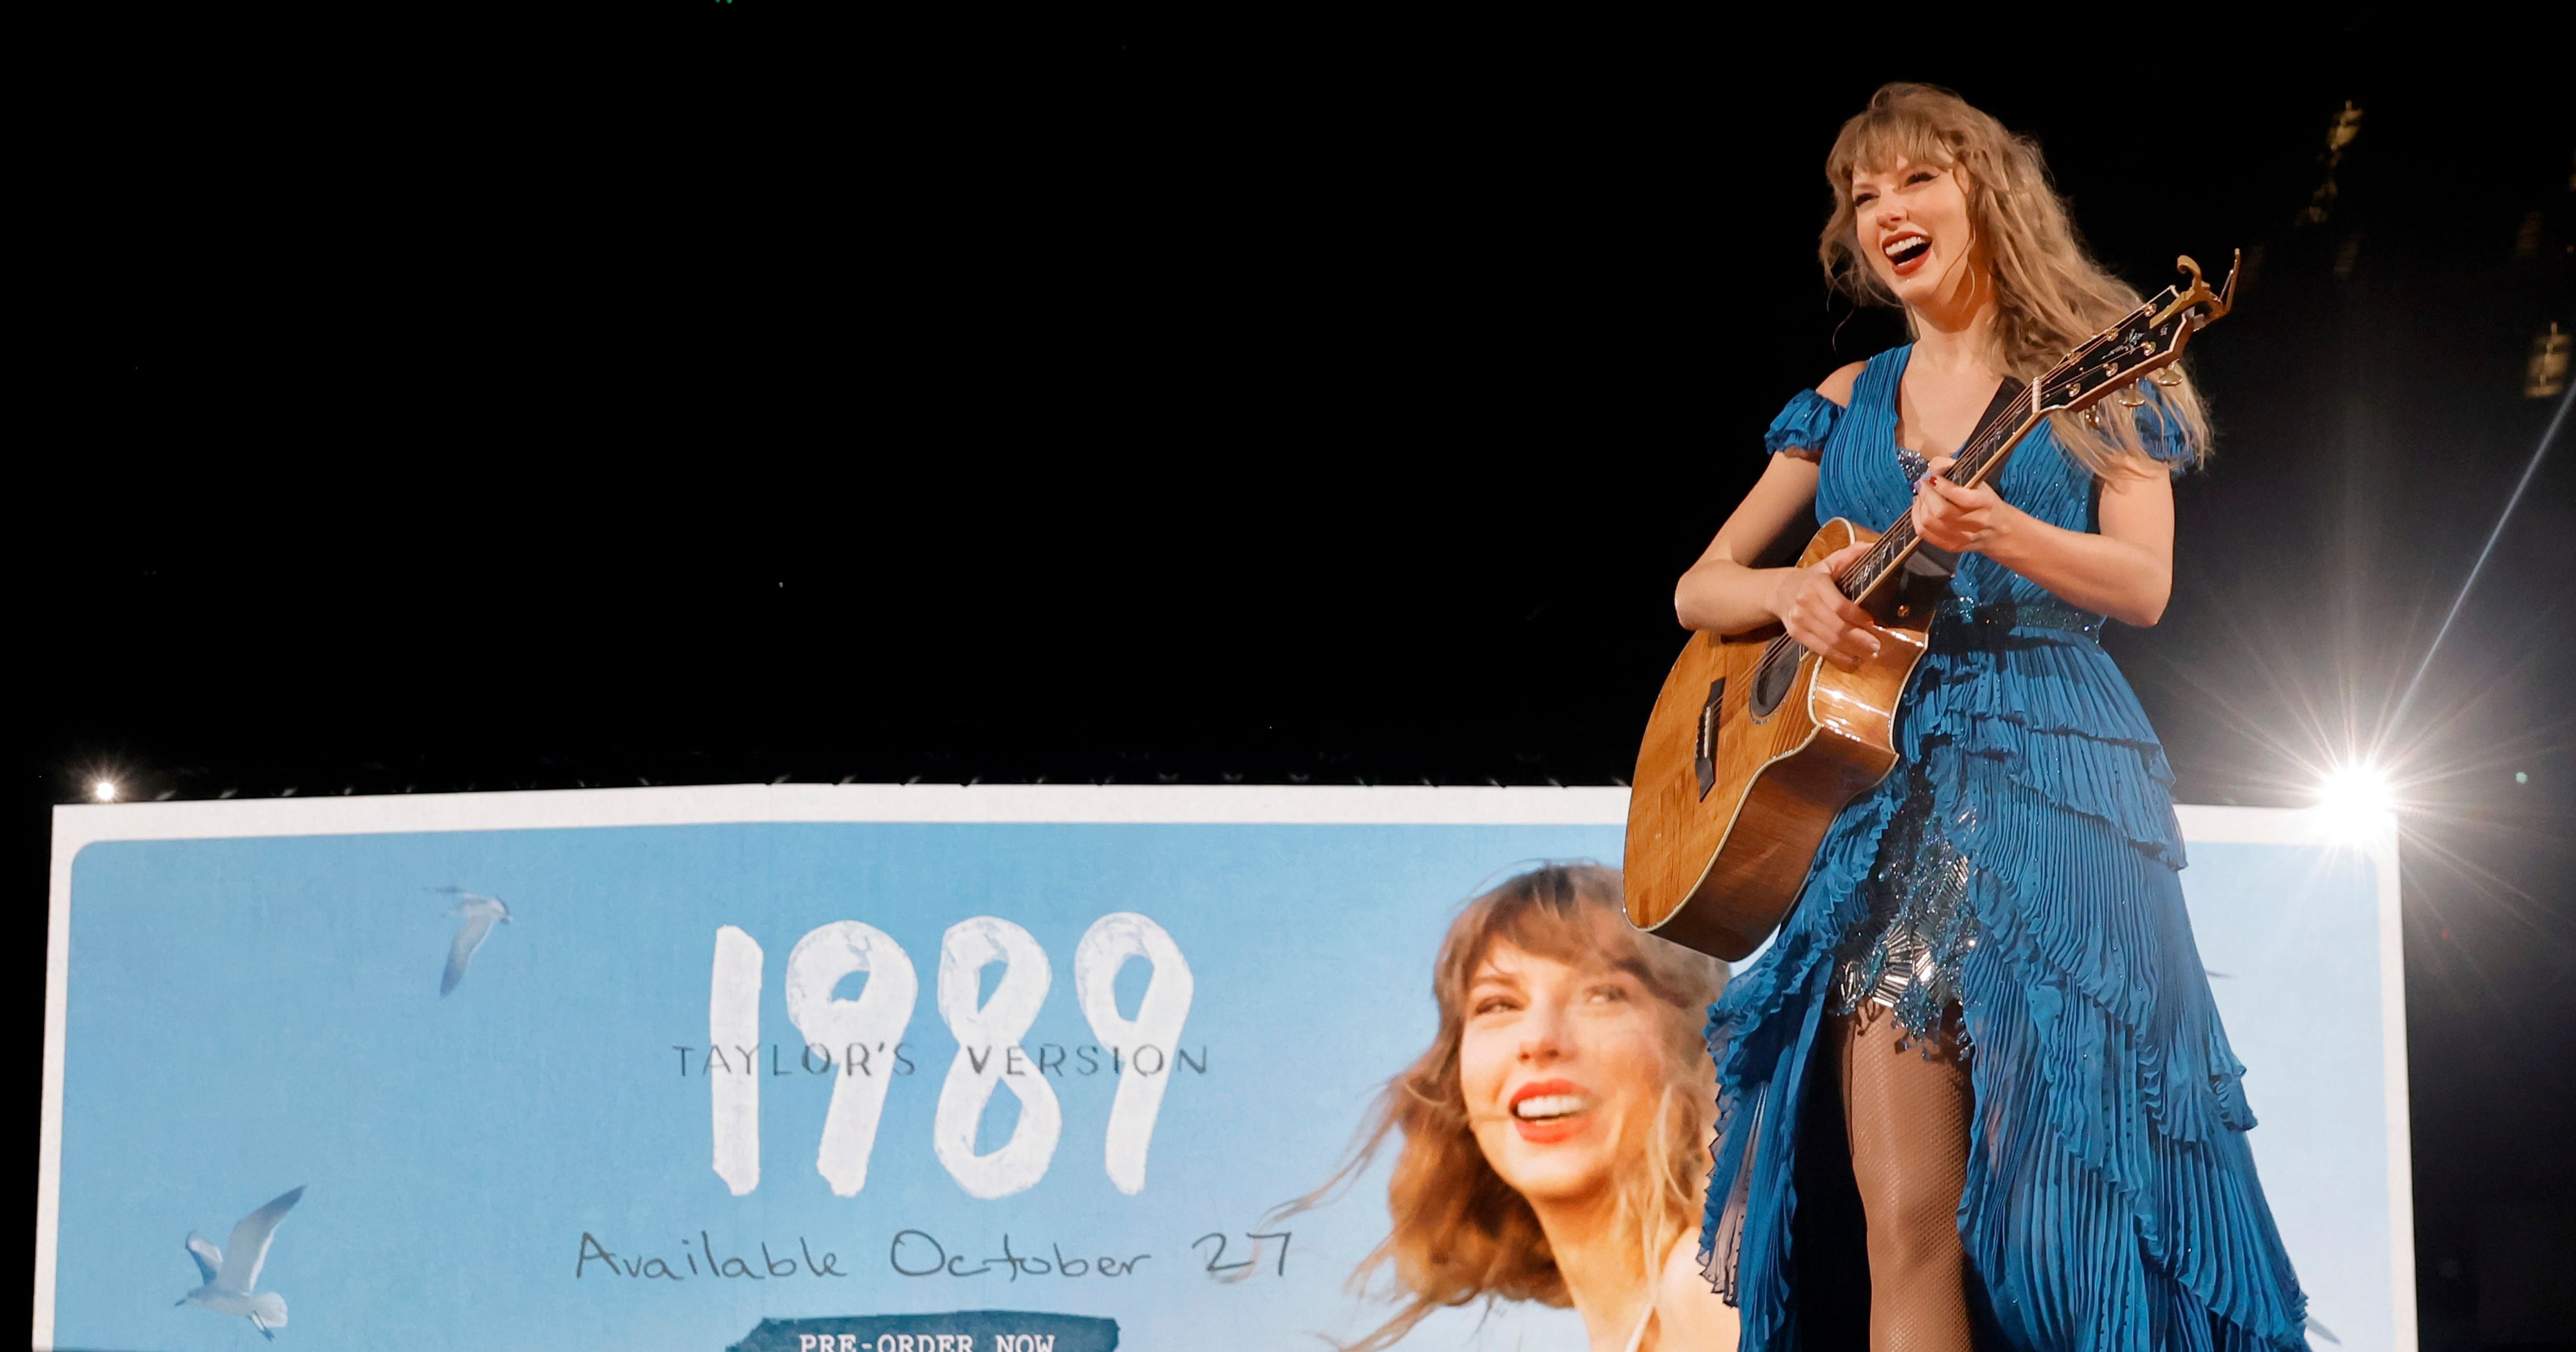 1989 (Taylor’s Version) Release Date, Songs, Collabs